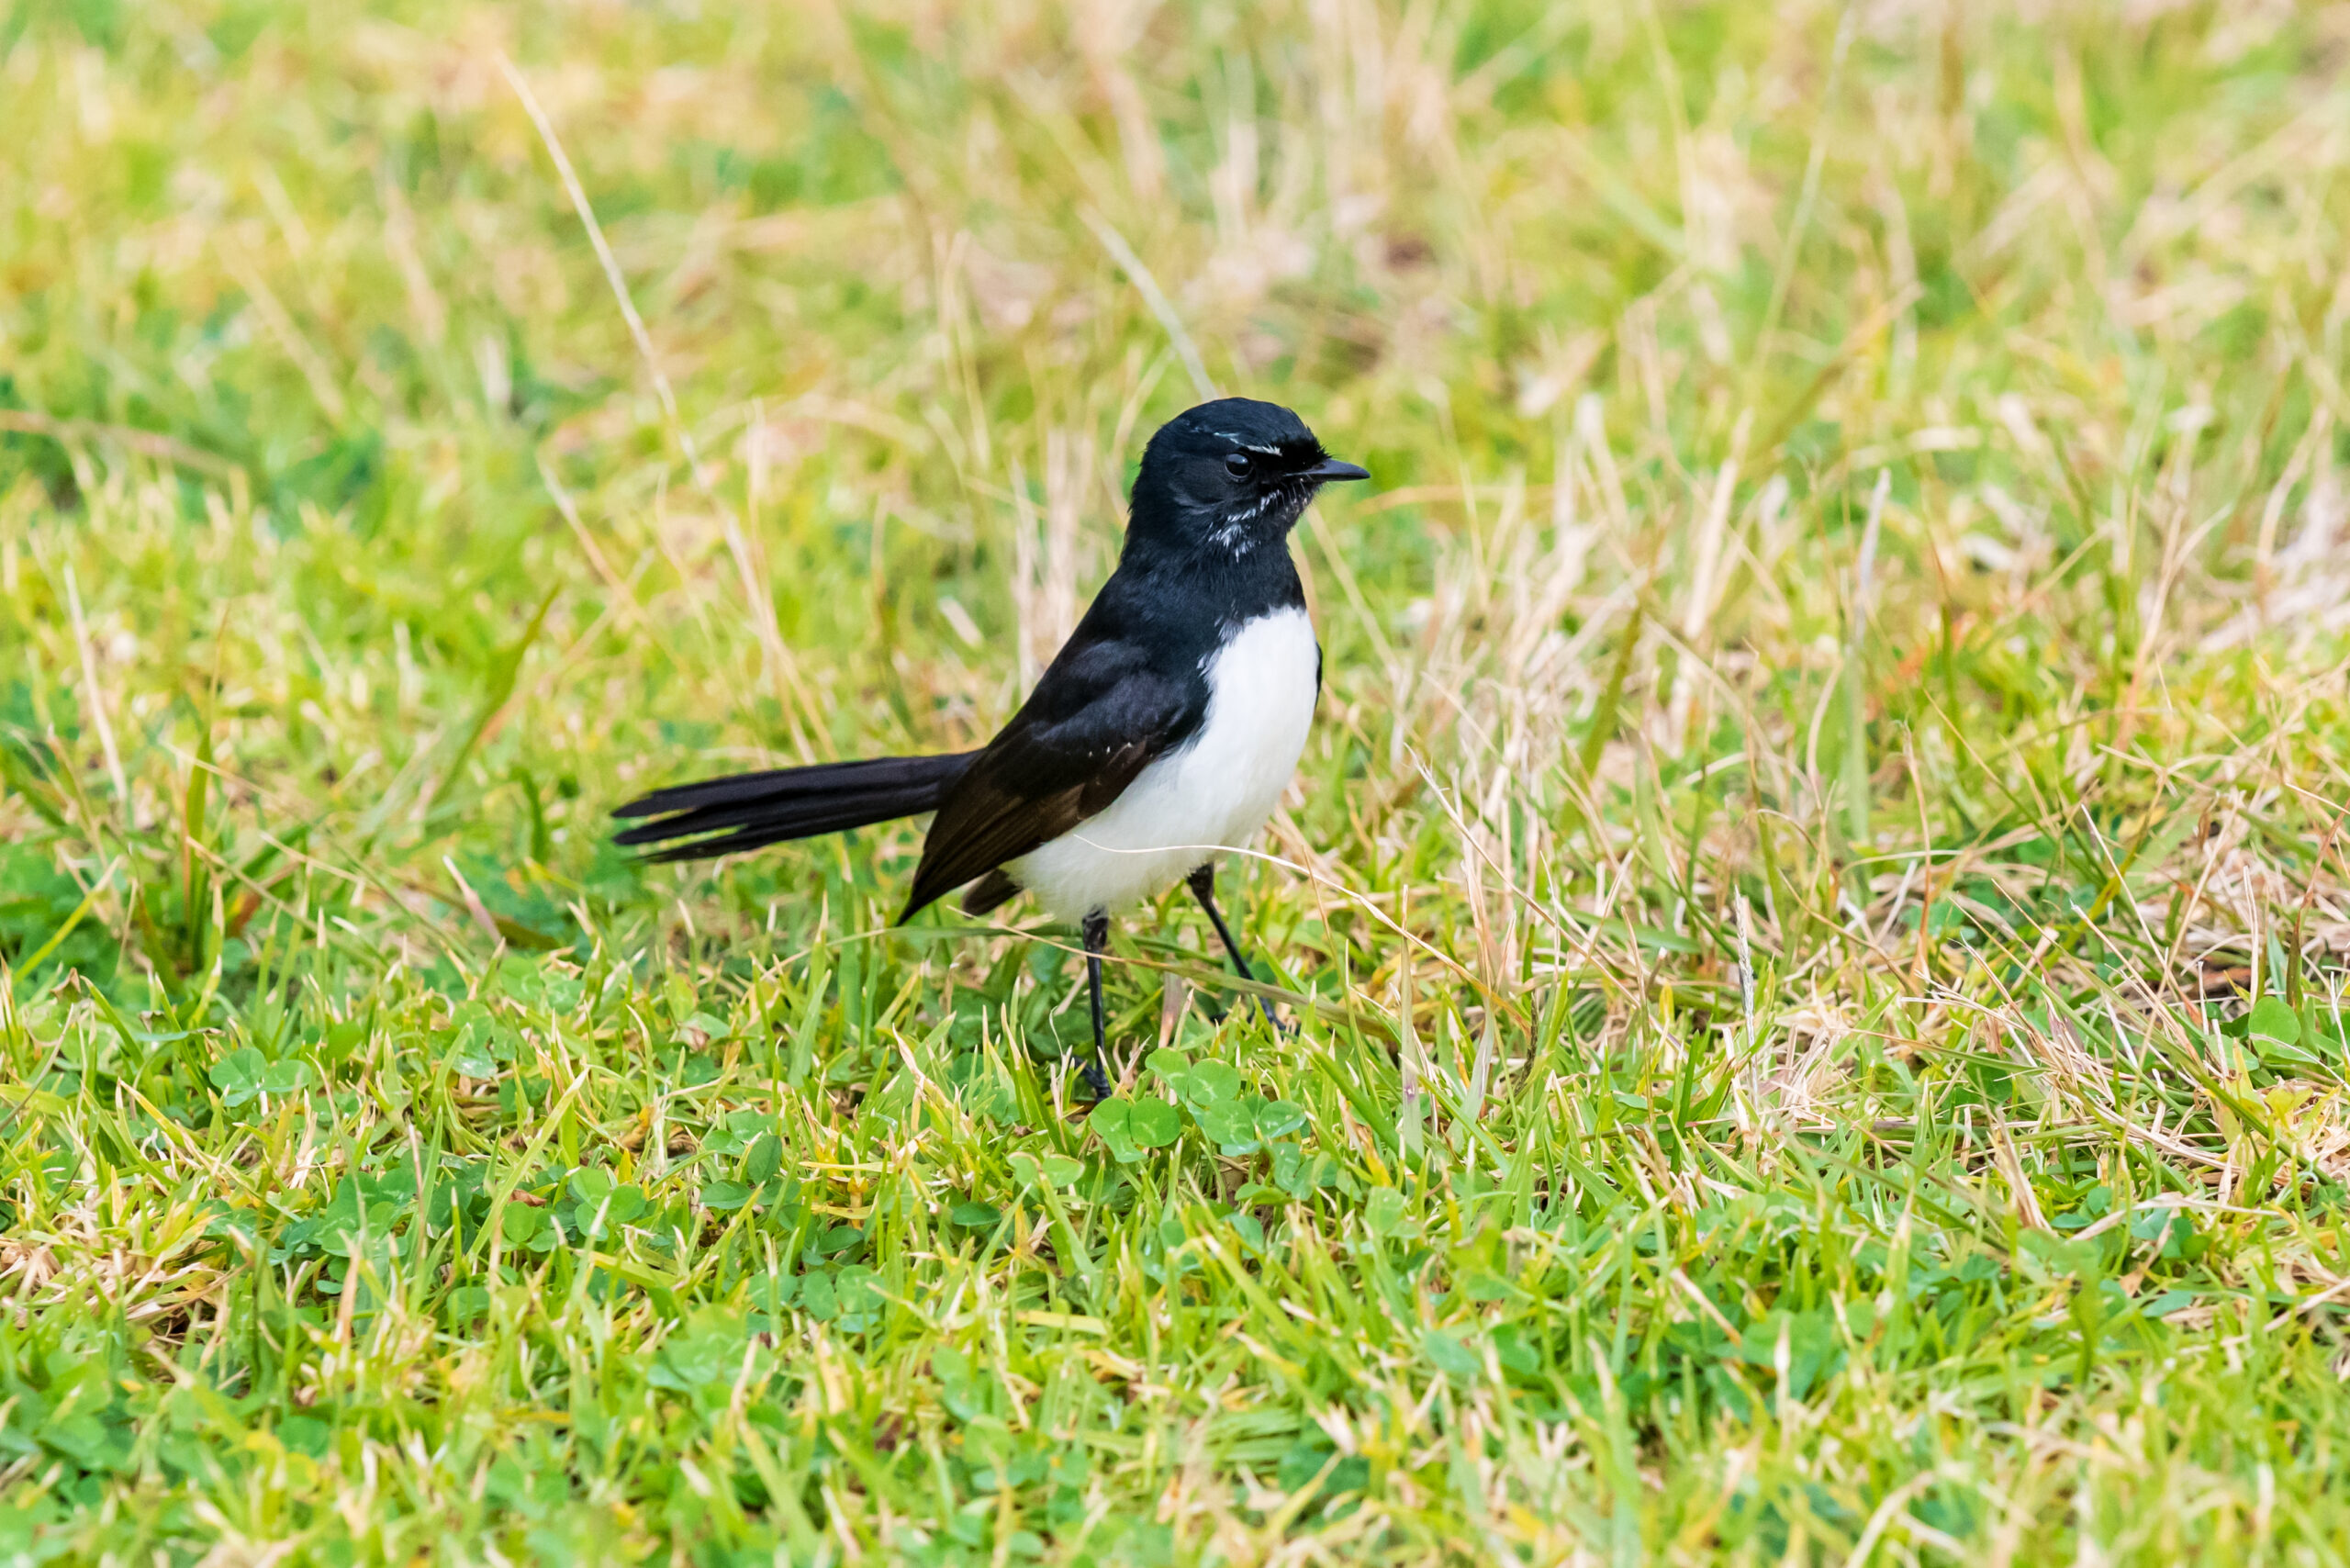 This is a close-up photograph of a willie wagtail. The bird is mostly black with a white belly. It appears to have white eyebrows and white whiskers. It is standing on green grass.